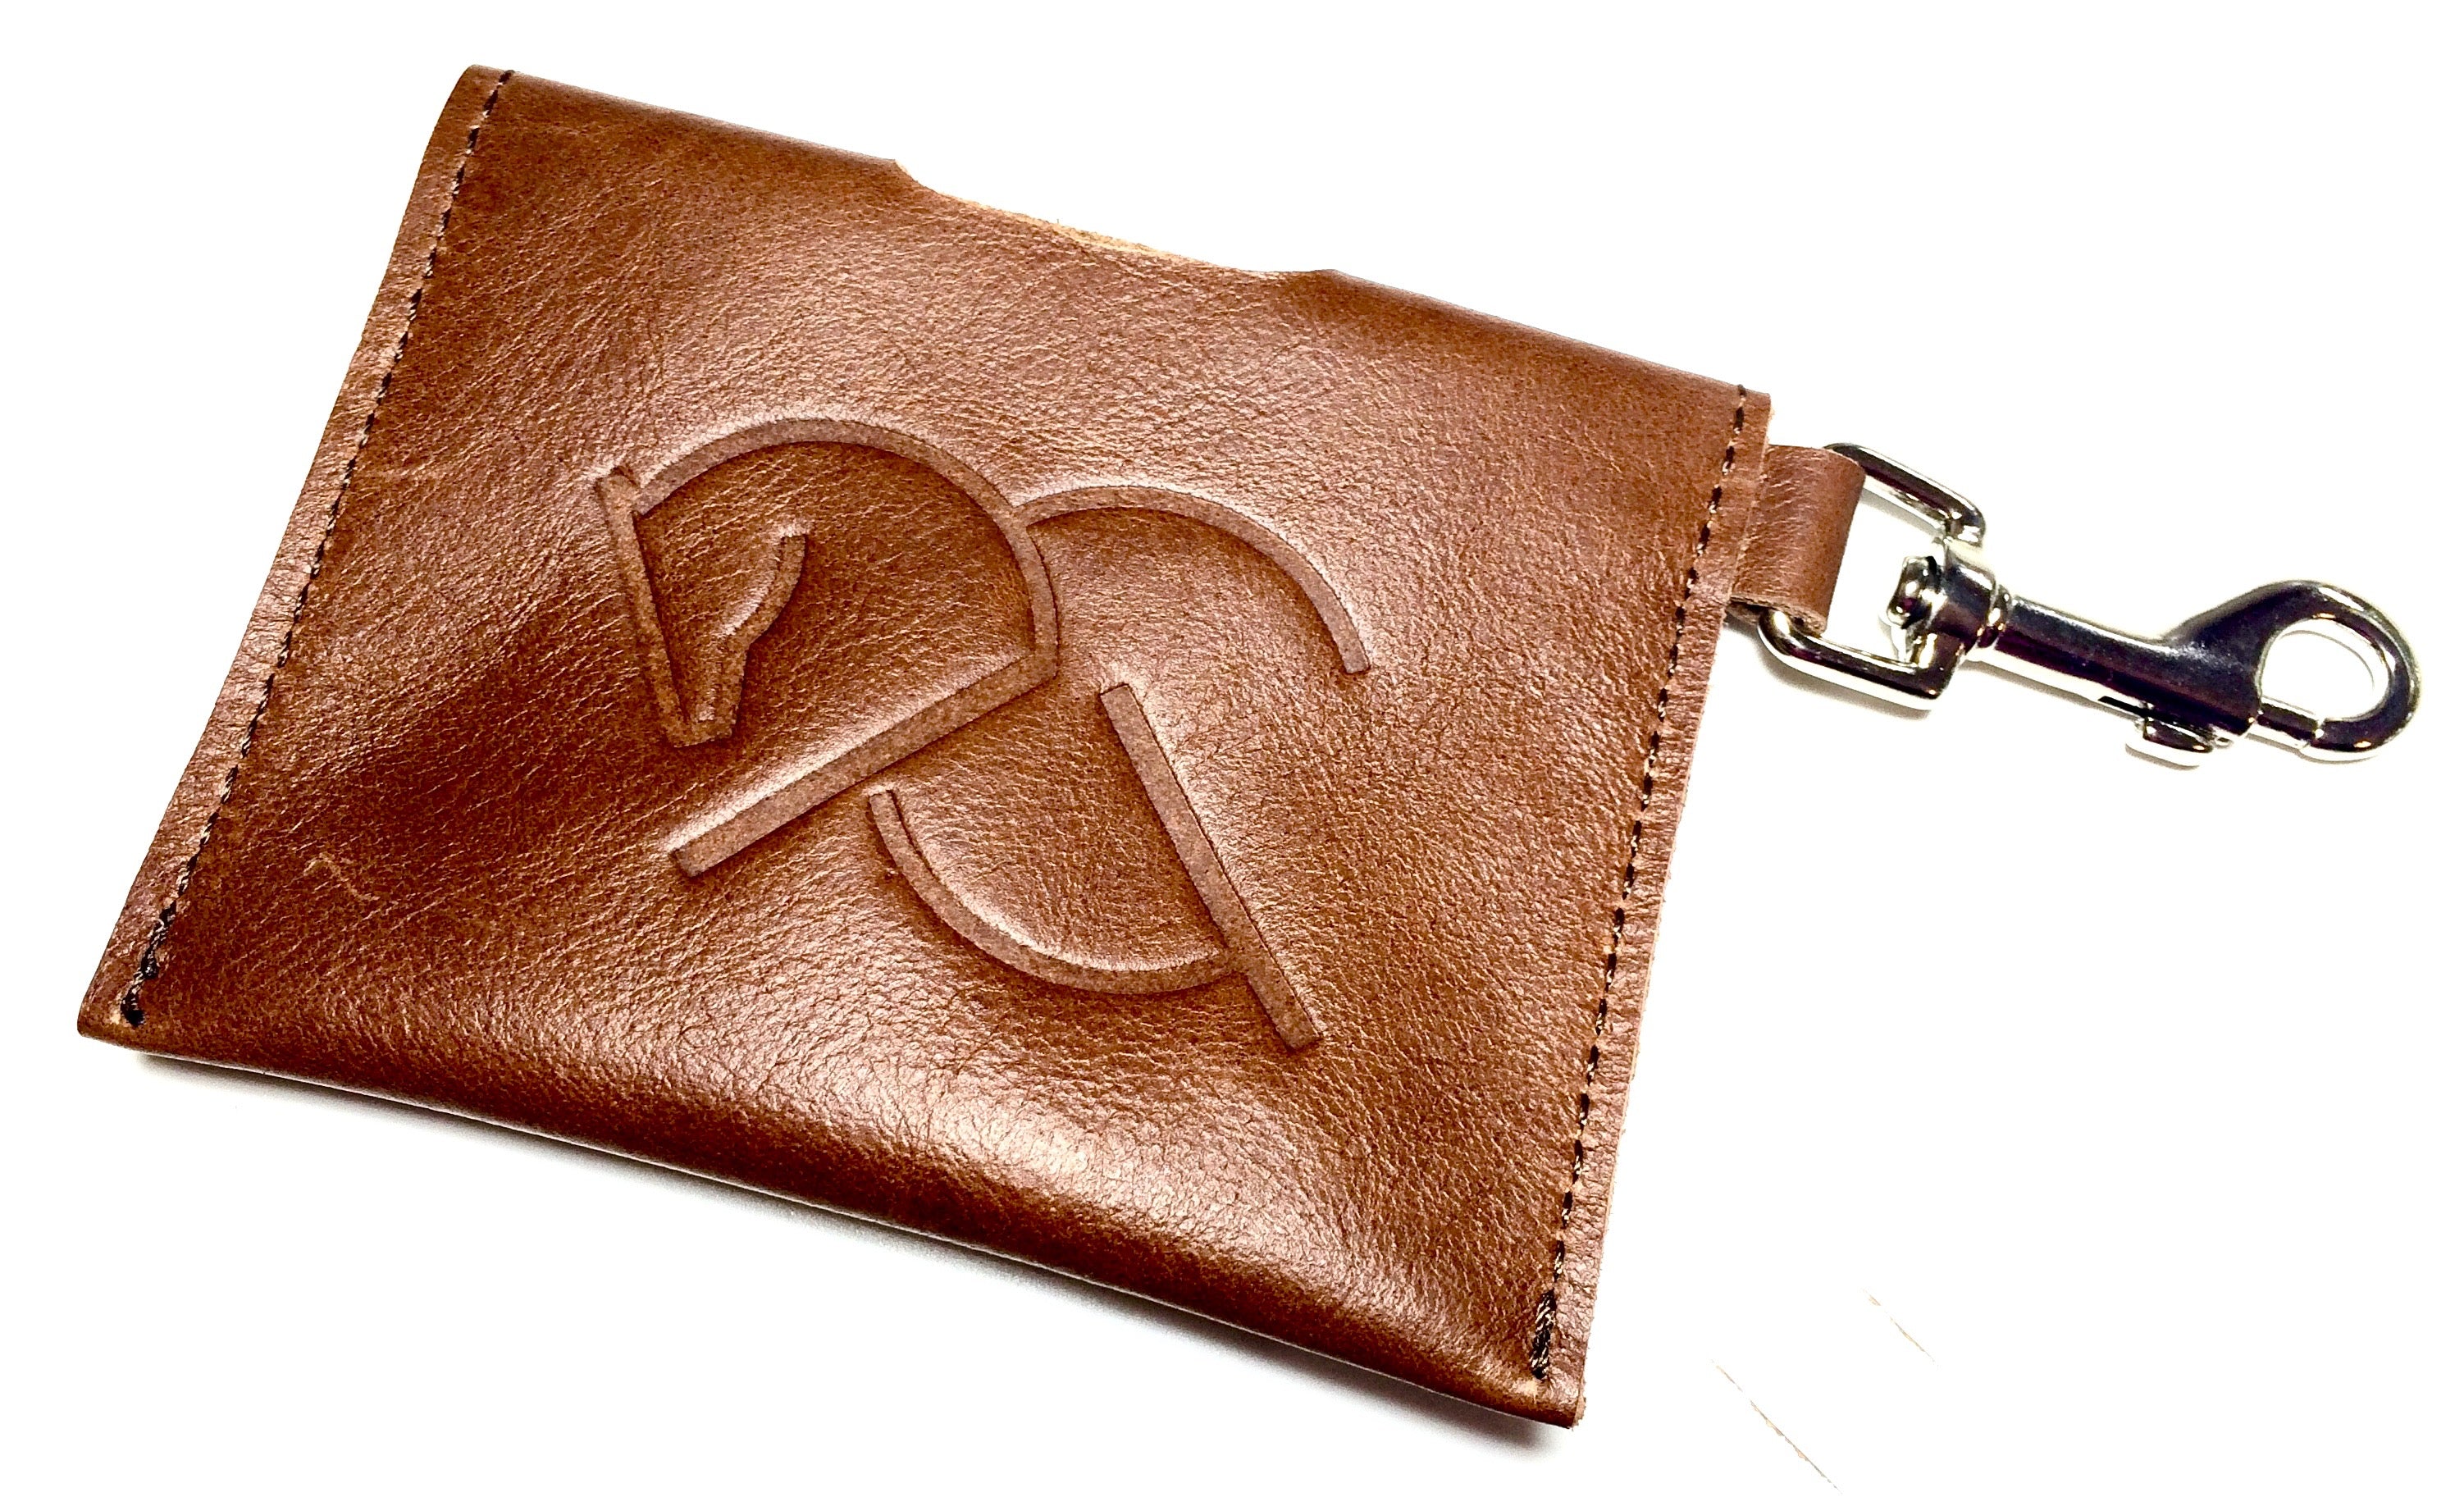 ACG CARD HOLDER in red dun, Leather Card Holder - AtelierCG™